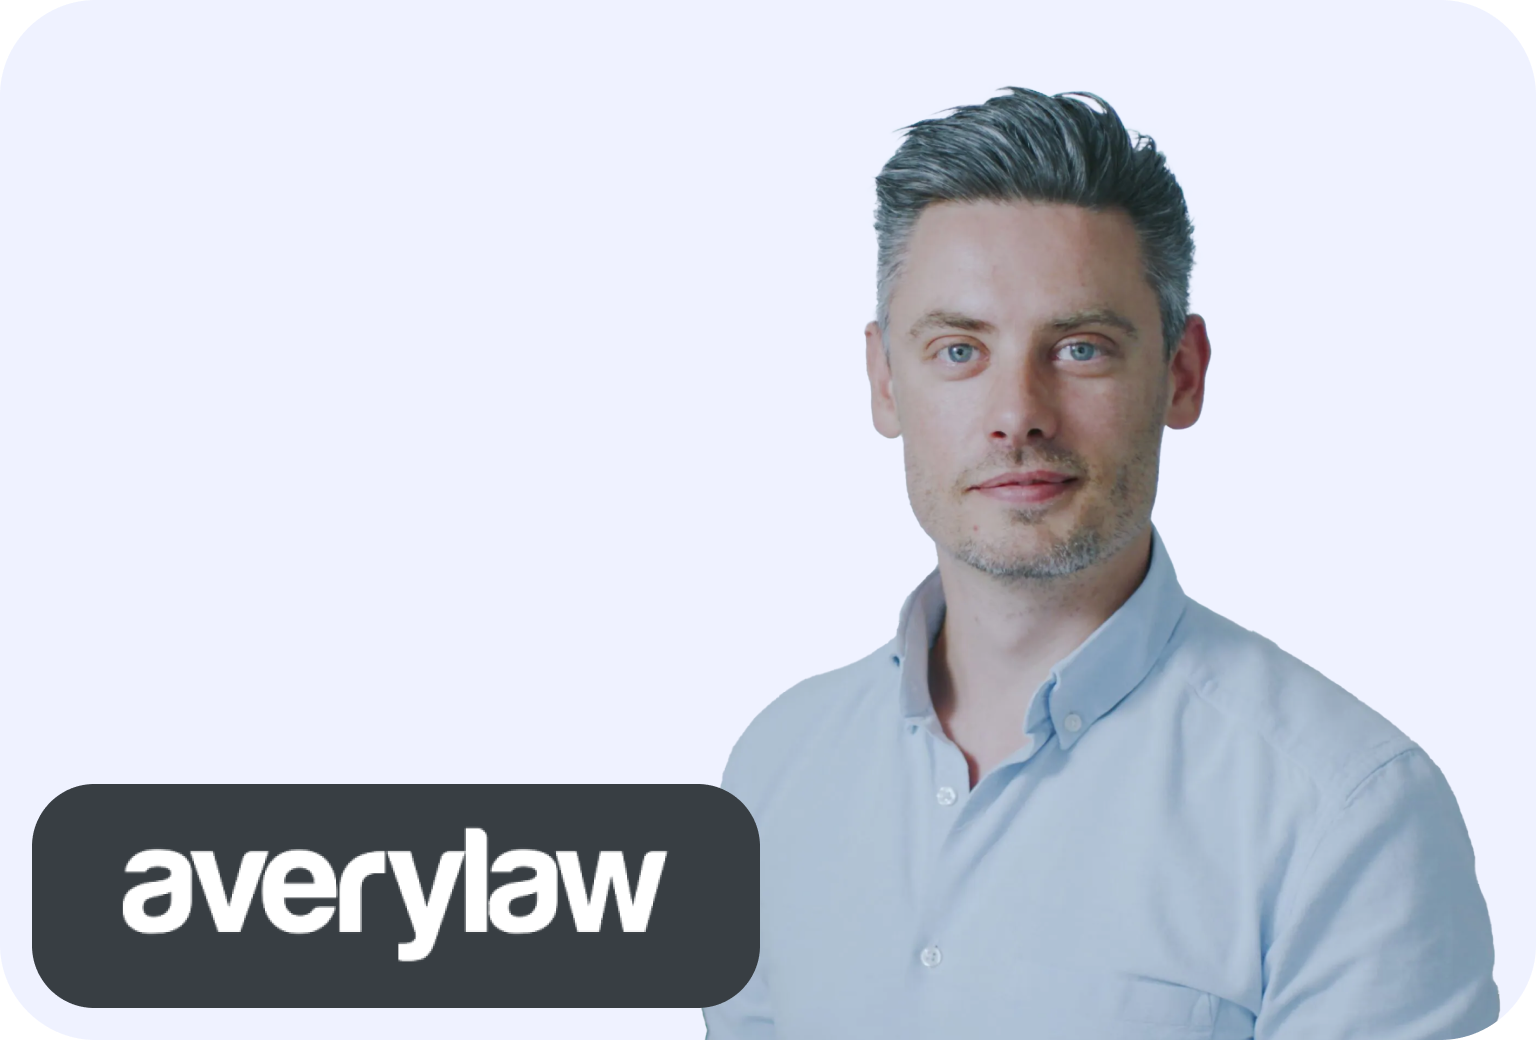 Avery Law uses Kolleno for AR management and all payments related communication